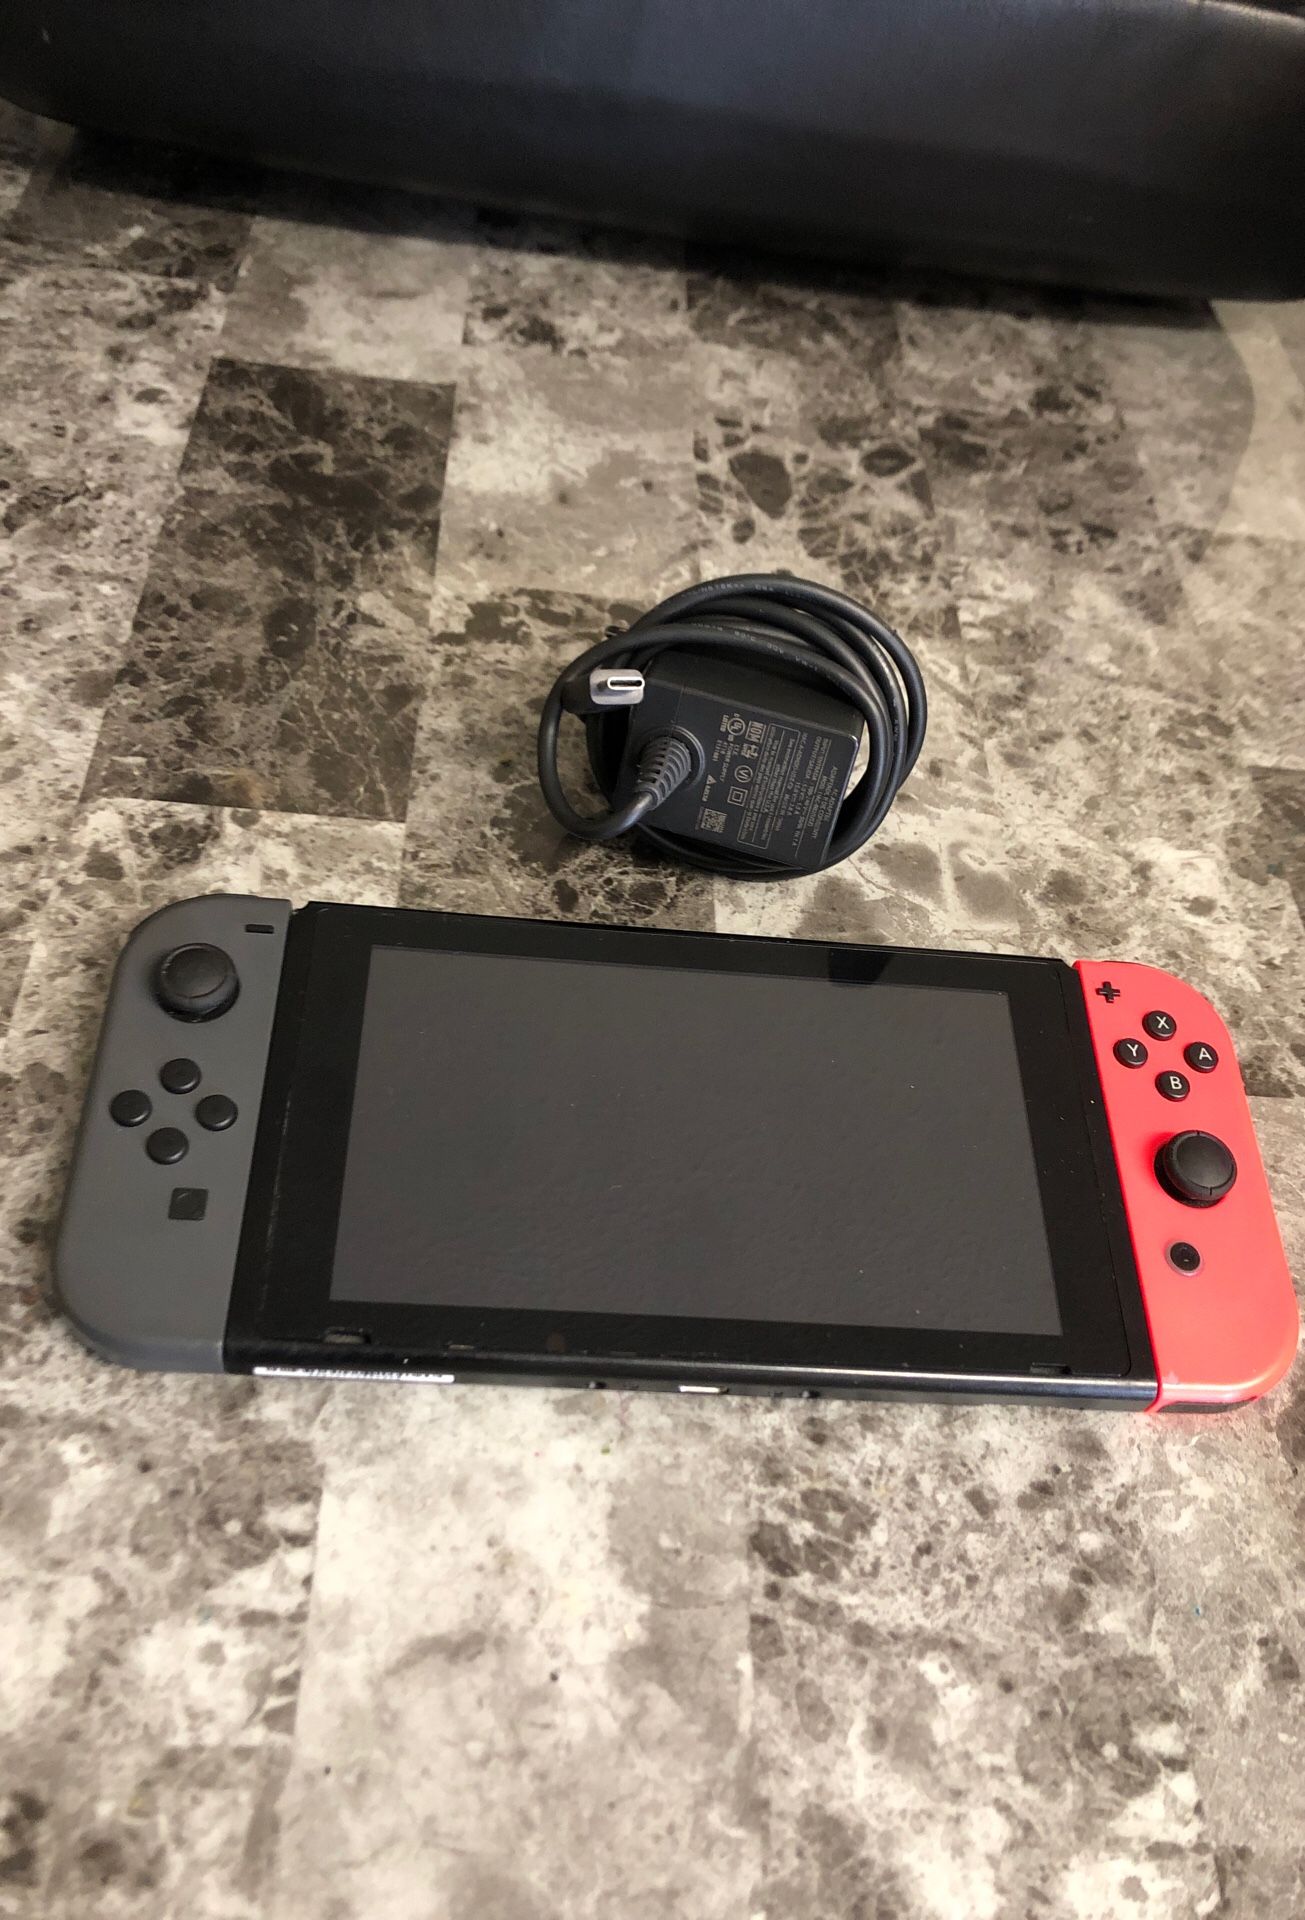 Nintendo Switch w. Charger $150 obo